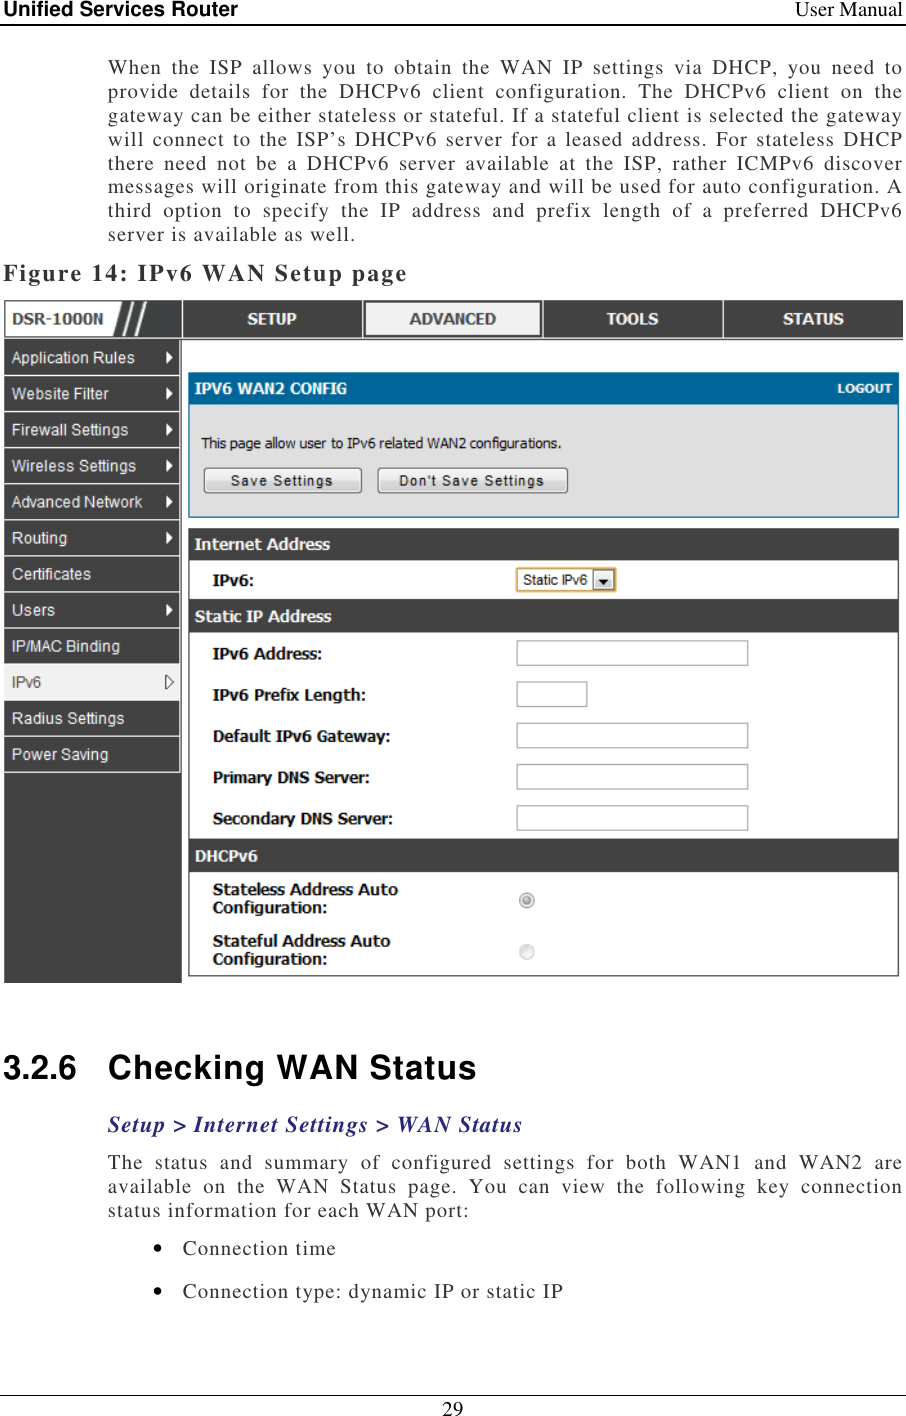 Unified Services Router    User Manual 29  When  the  ISP  allows  you  to  obtain  the  WAN  IP  settings  via  DHCP,  you  need  to provide  details  for  the  DHCPv6  client  configuration.  The  DHCPv6  client  on  the gateway can be either stateless or stateful. If a stateful client is selected the gateway will connect  to  the ISP’s  DHCPv6 server  for a  leased  address.  For  stateless  DHCP there  need  not  be  a  DHCPv6  server  available  at  the  ISP,  rather  ICMPv6  discover messages will originate from this gateway and will be used for auto configuration. A third  option  to  specify  the  IP  address  and  prefix  length  of  a  preferred  DHCPv6 server is available as well.  Figure 14: IPv6 WAN Setup page   3.2.6  Checking WAN Status Setup &gt; Internet Settings &gt; WAN Status The  status  and  summary  of  configured  settings  for  both  WAN1  and  WAN2  are available  on  the  WAN  Status  page.  You  can  view  the  following  key  connection status information for each WAN port: • Connection time • Connection type: dynamic IP or static IP 